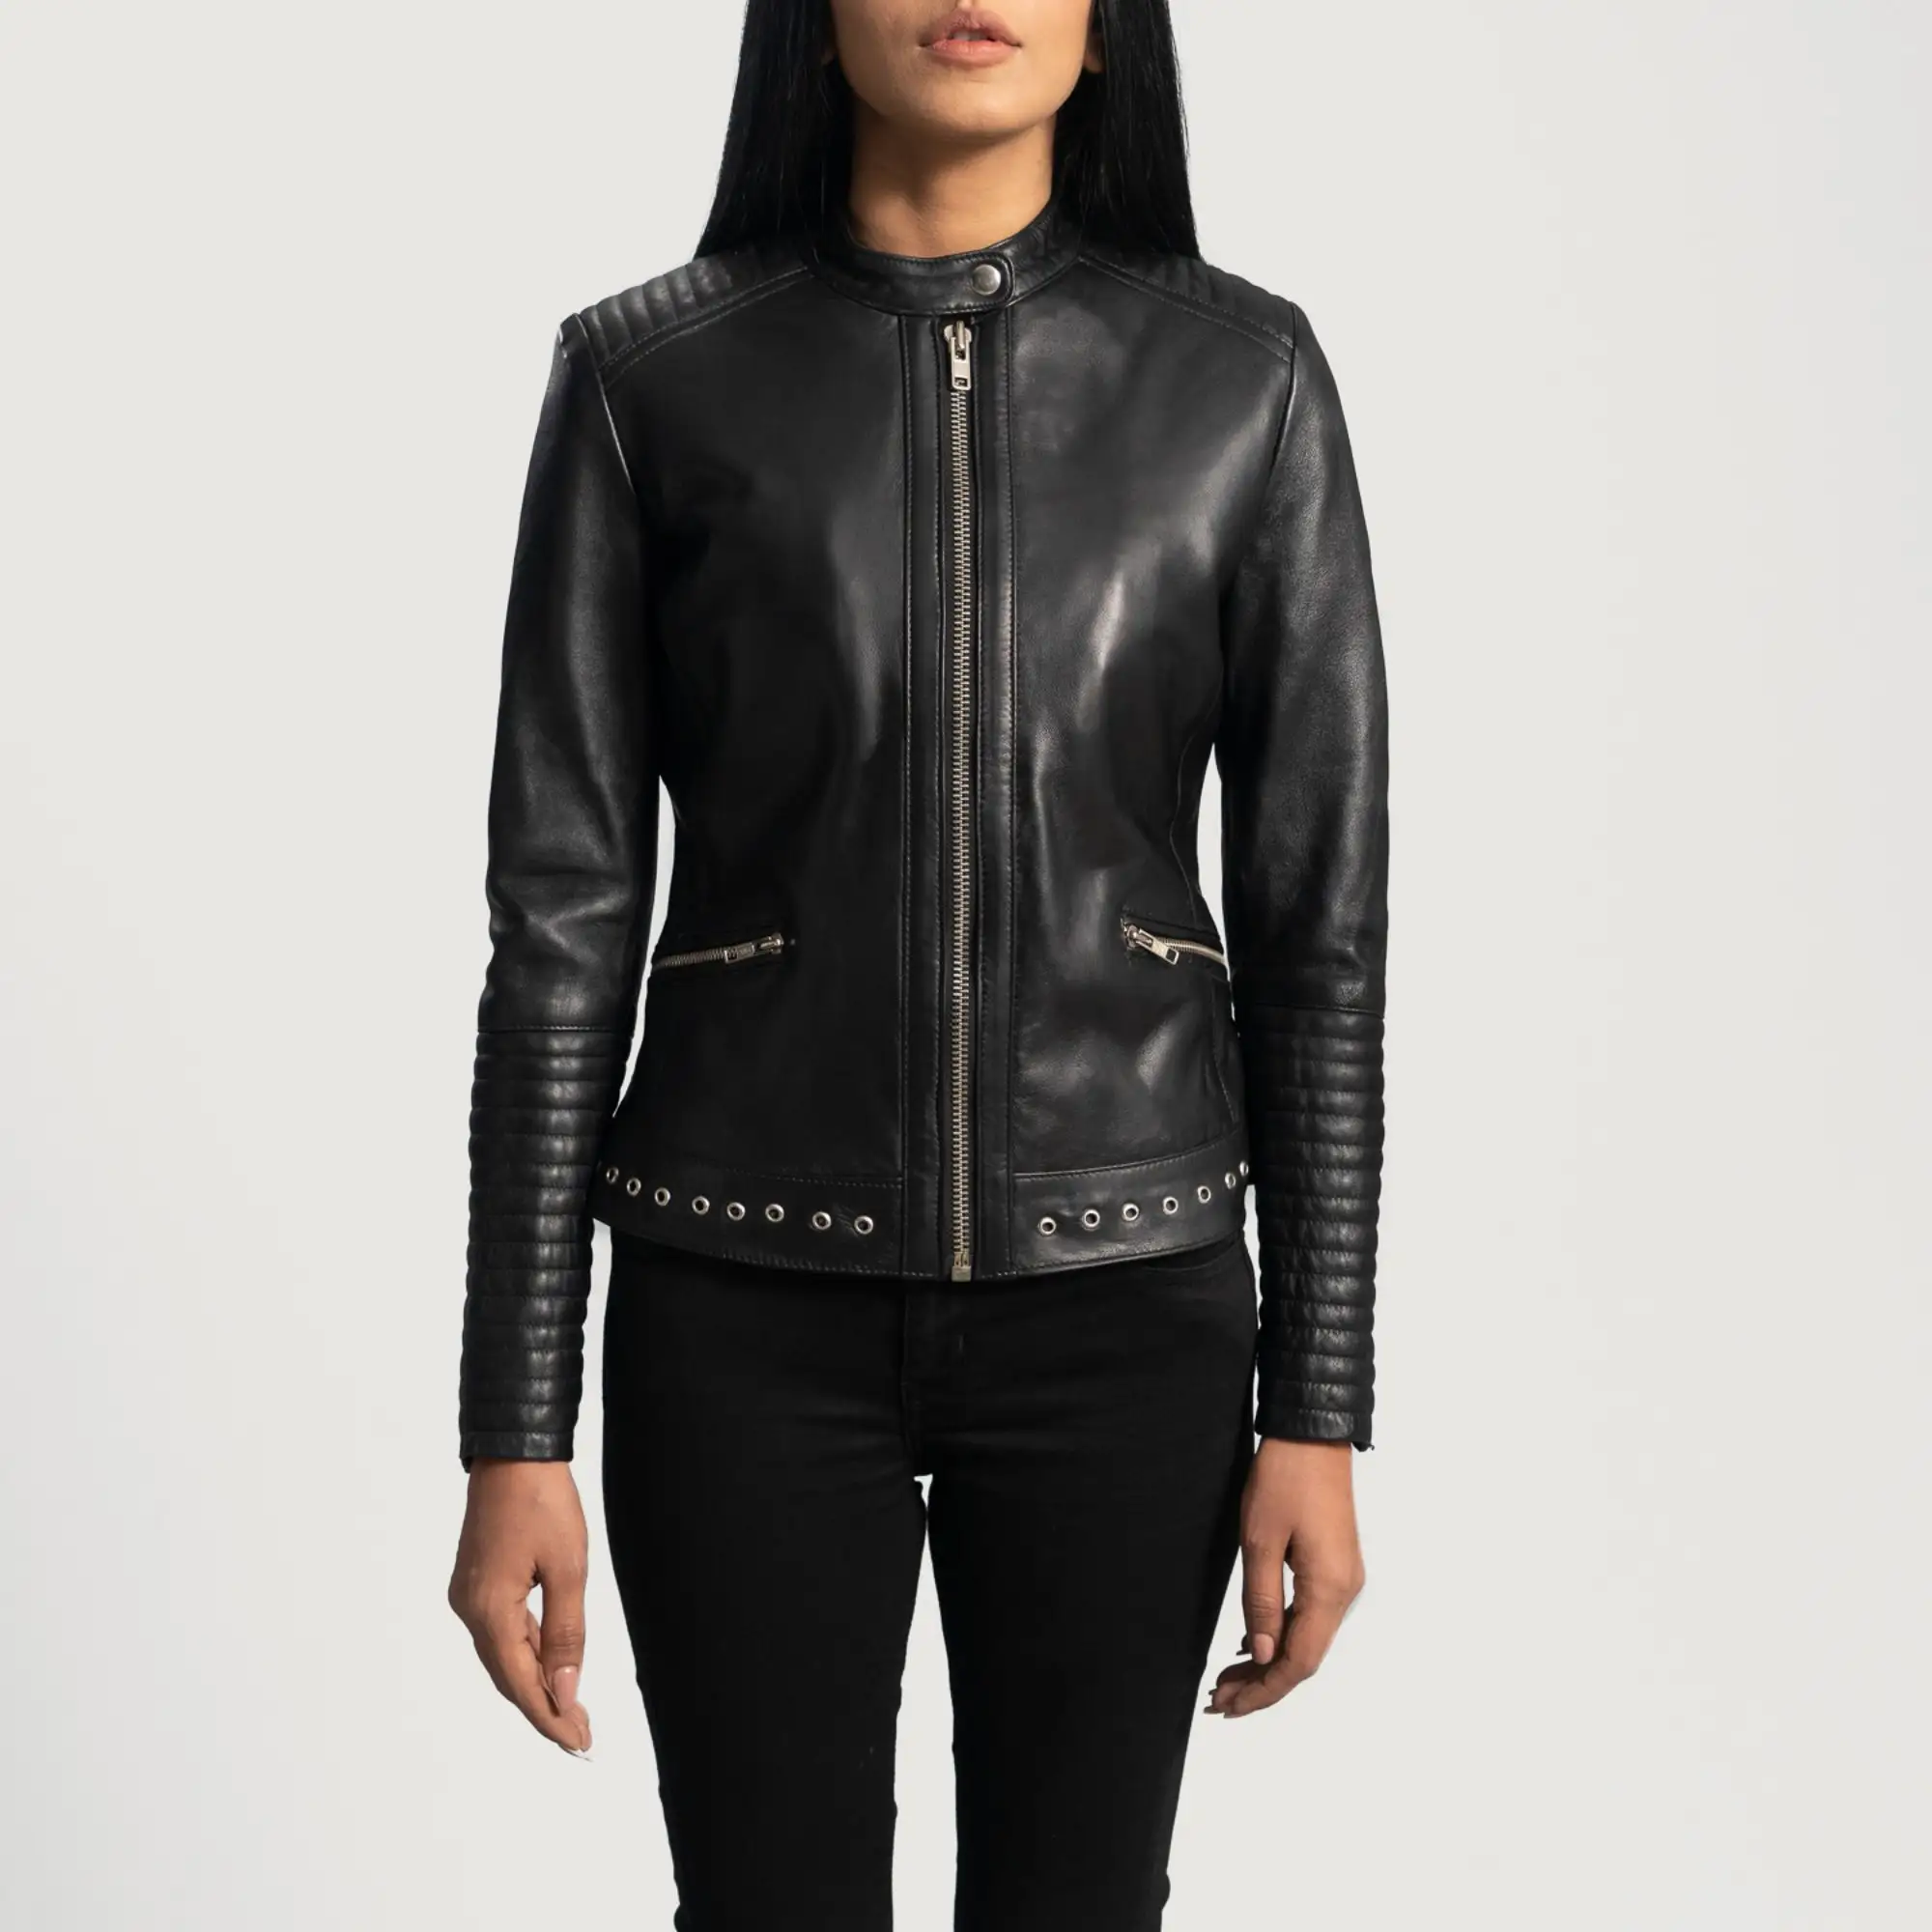 Real Leather Sheepskin Aniline Zipper Haley Ray Black Women Biker Jacket with Quilted Viscose Lining and Inside Outside Pockets